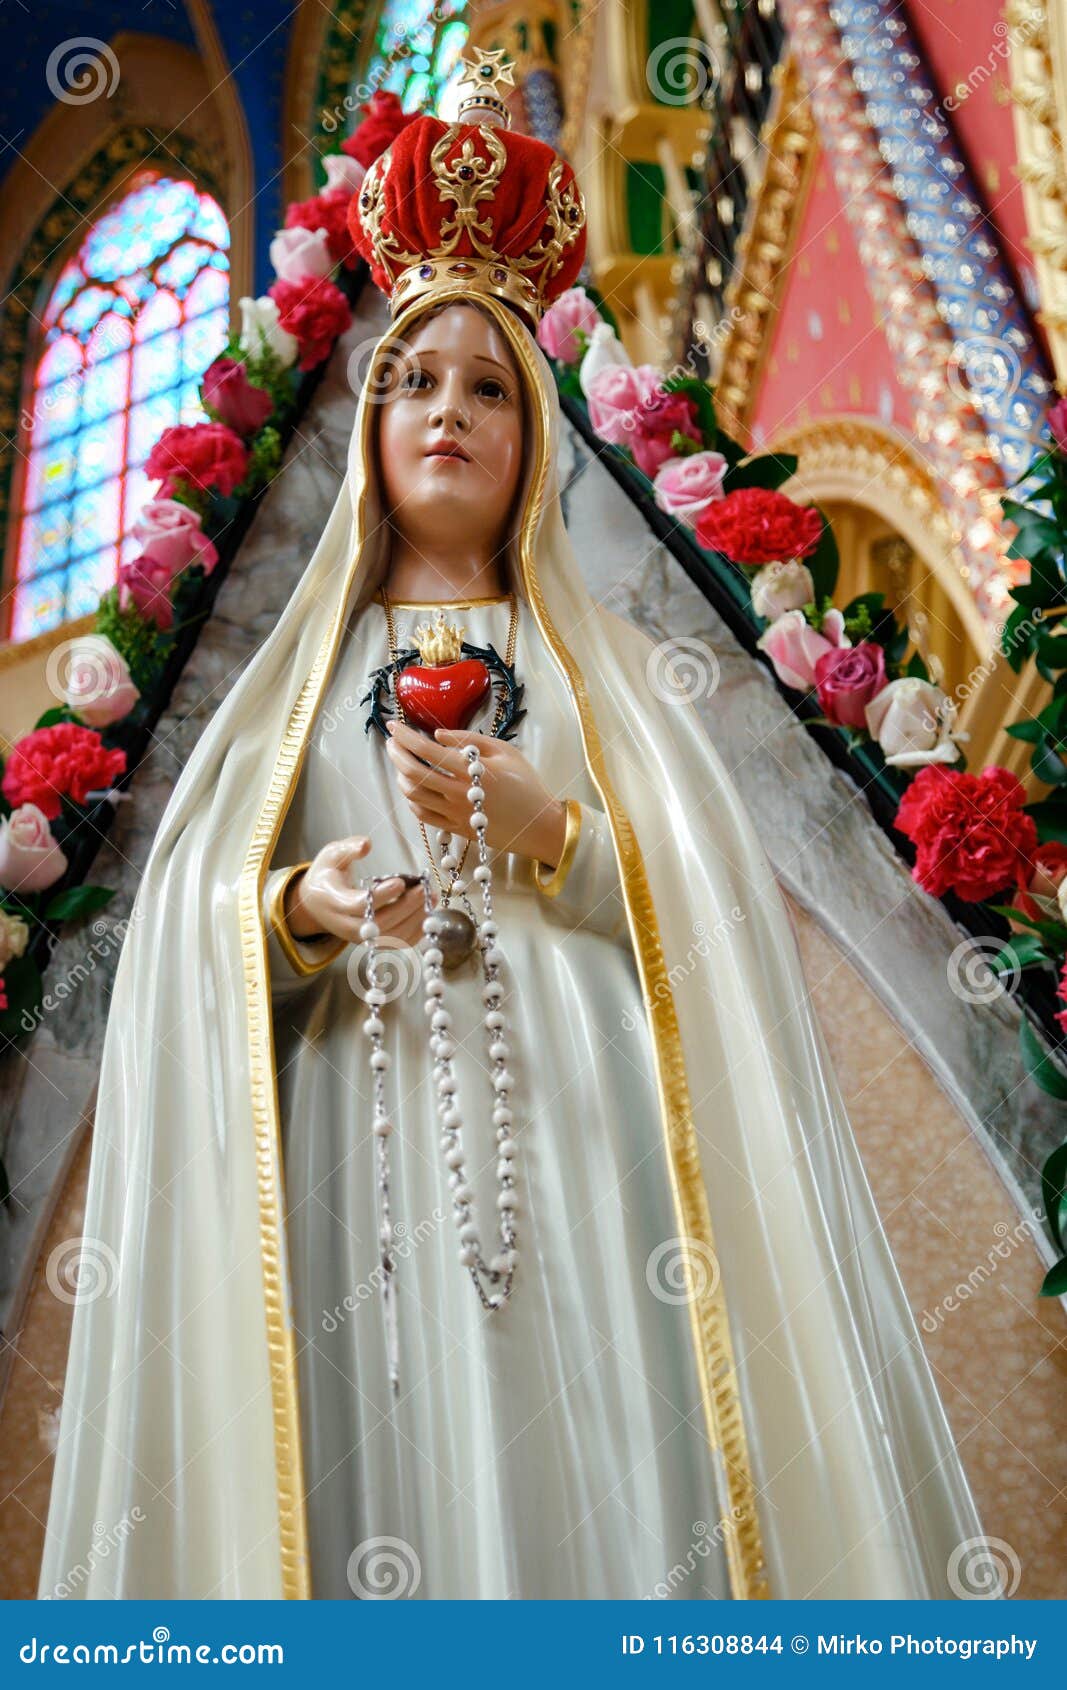 our lady of fÃÂ¡tima, la virgen de fÃÂ¡tima